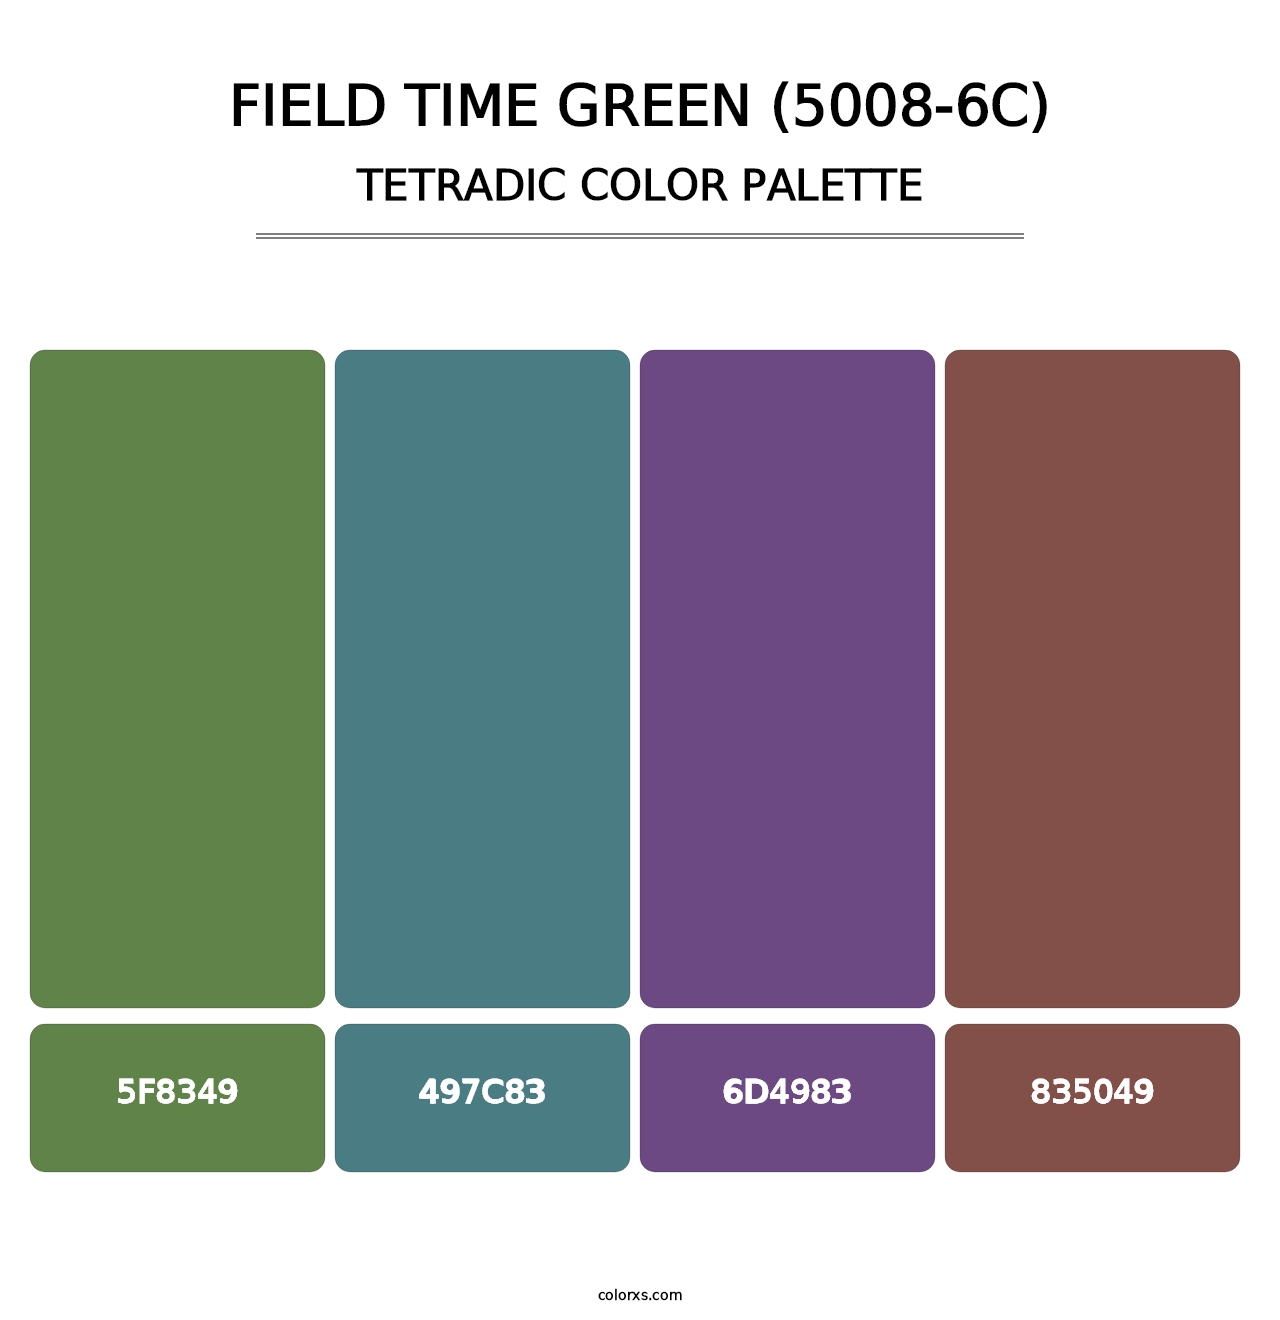 Field Time Green (5008-6C) - Tetradic Color Palette